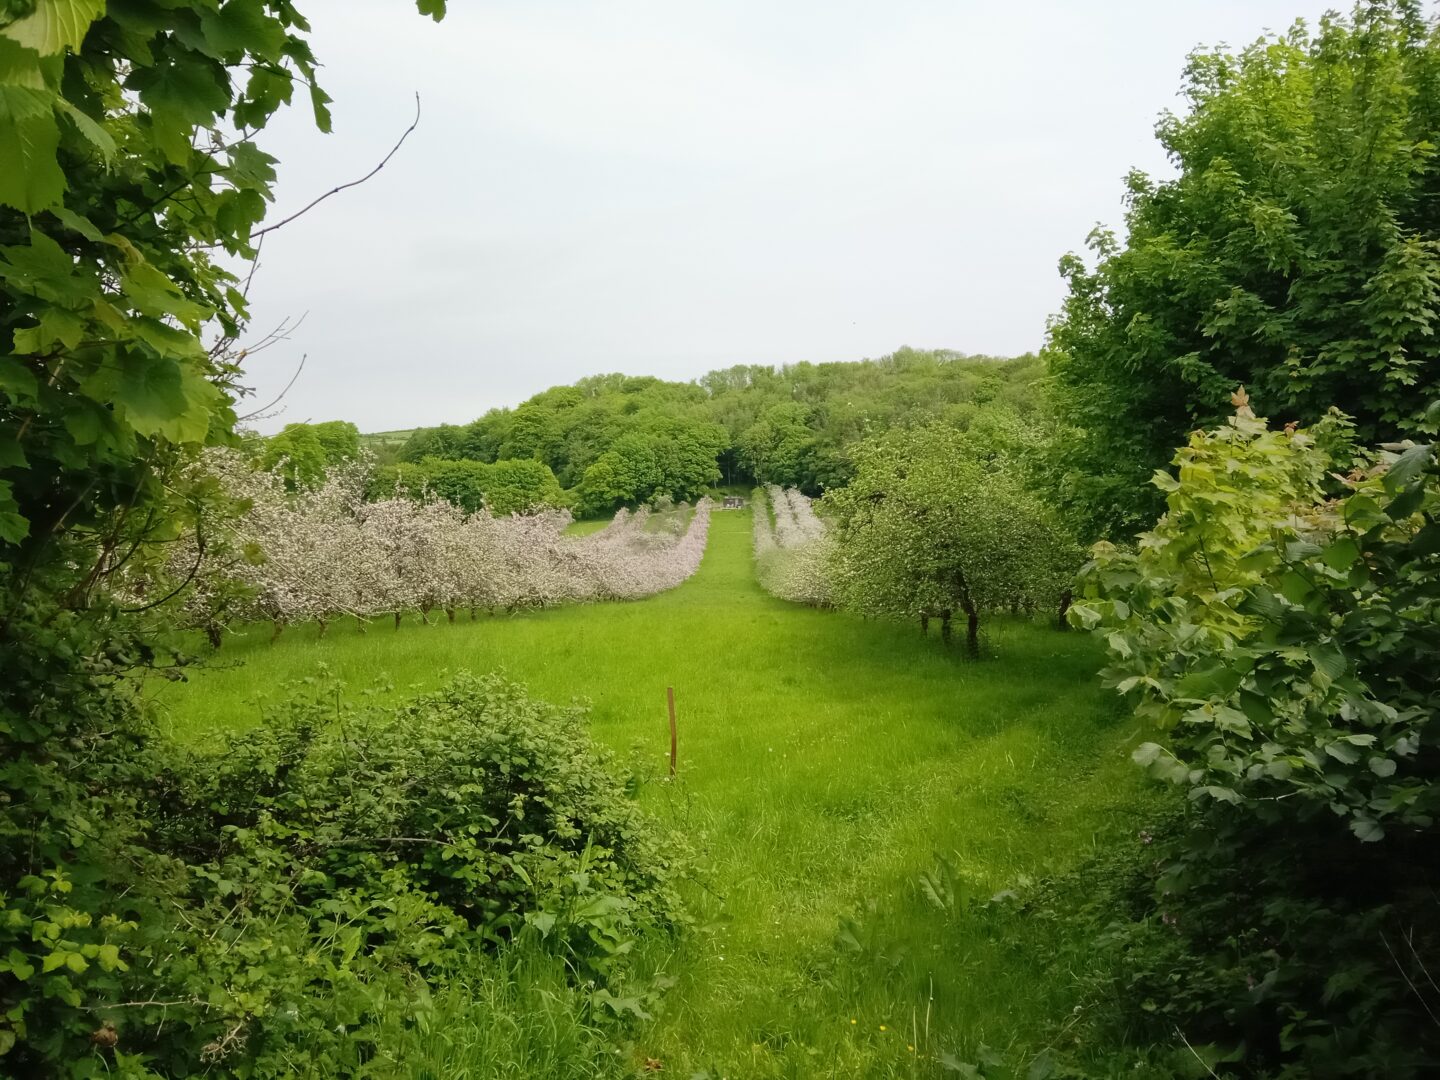 Photo of The Orchard with the apple trees in blossom and the shepherd's hut in the distance, taken May 2023